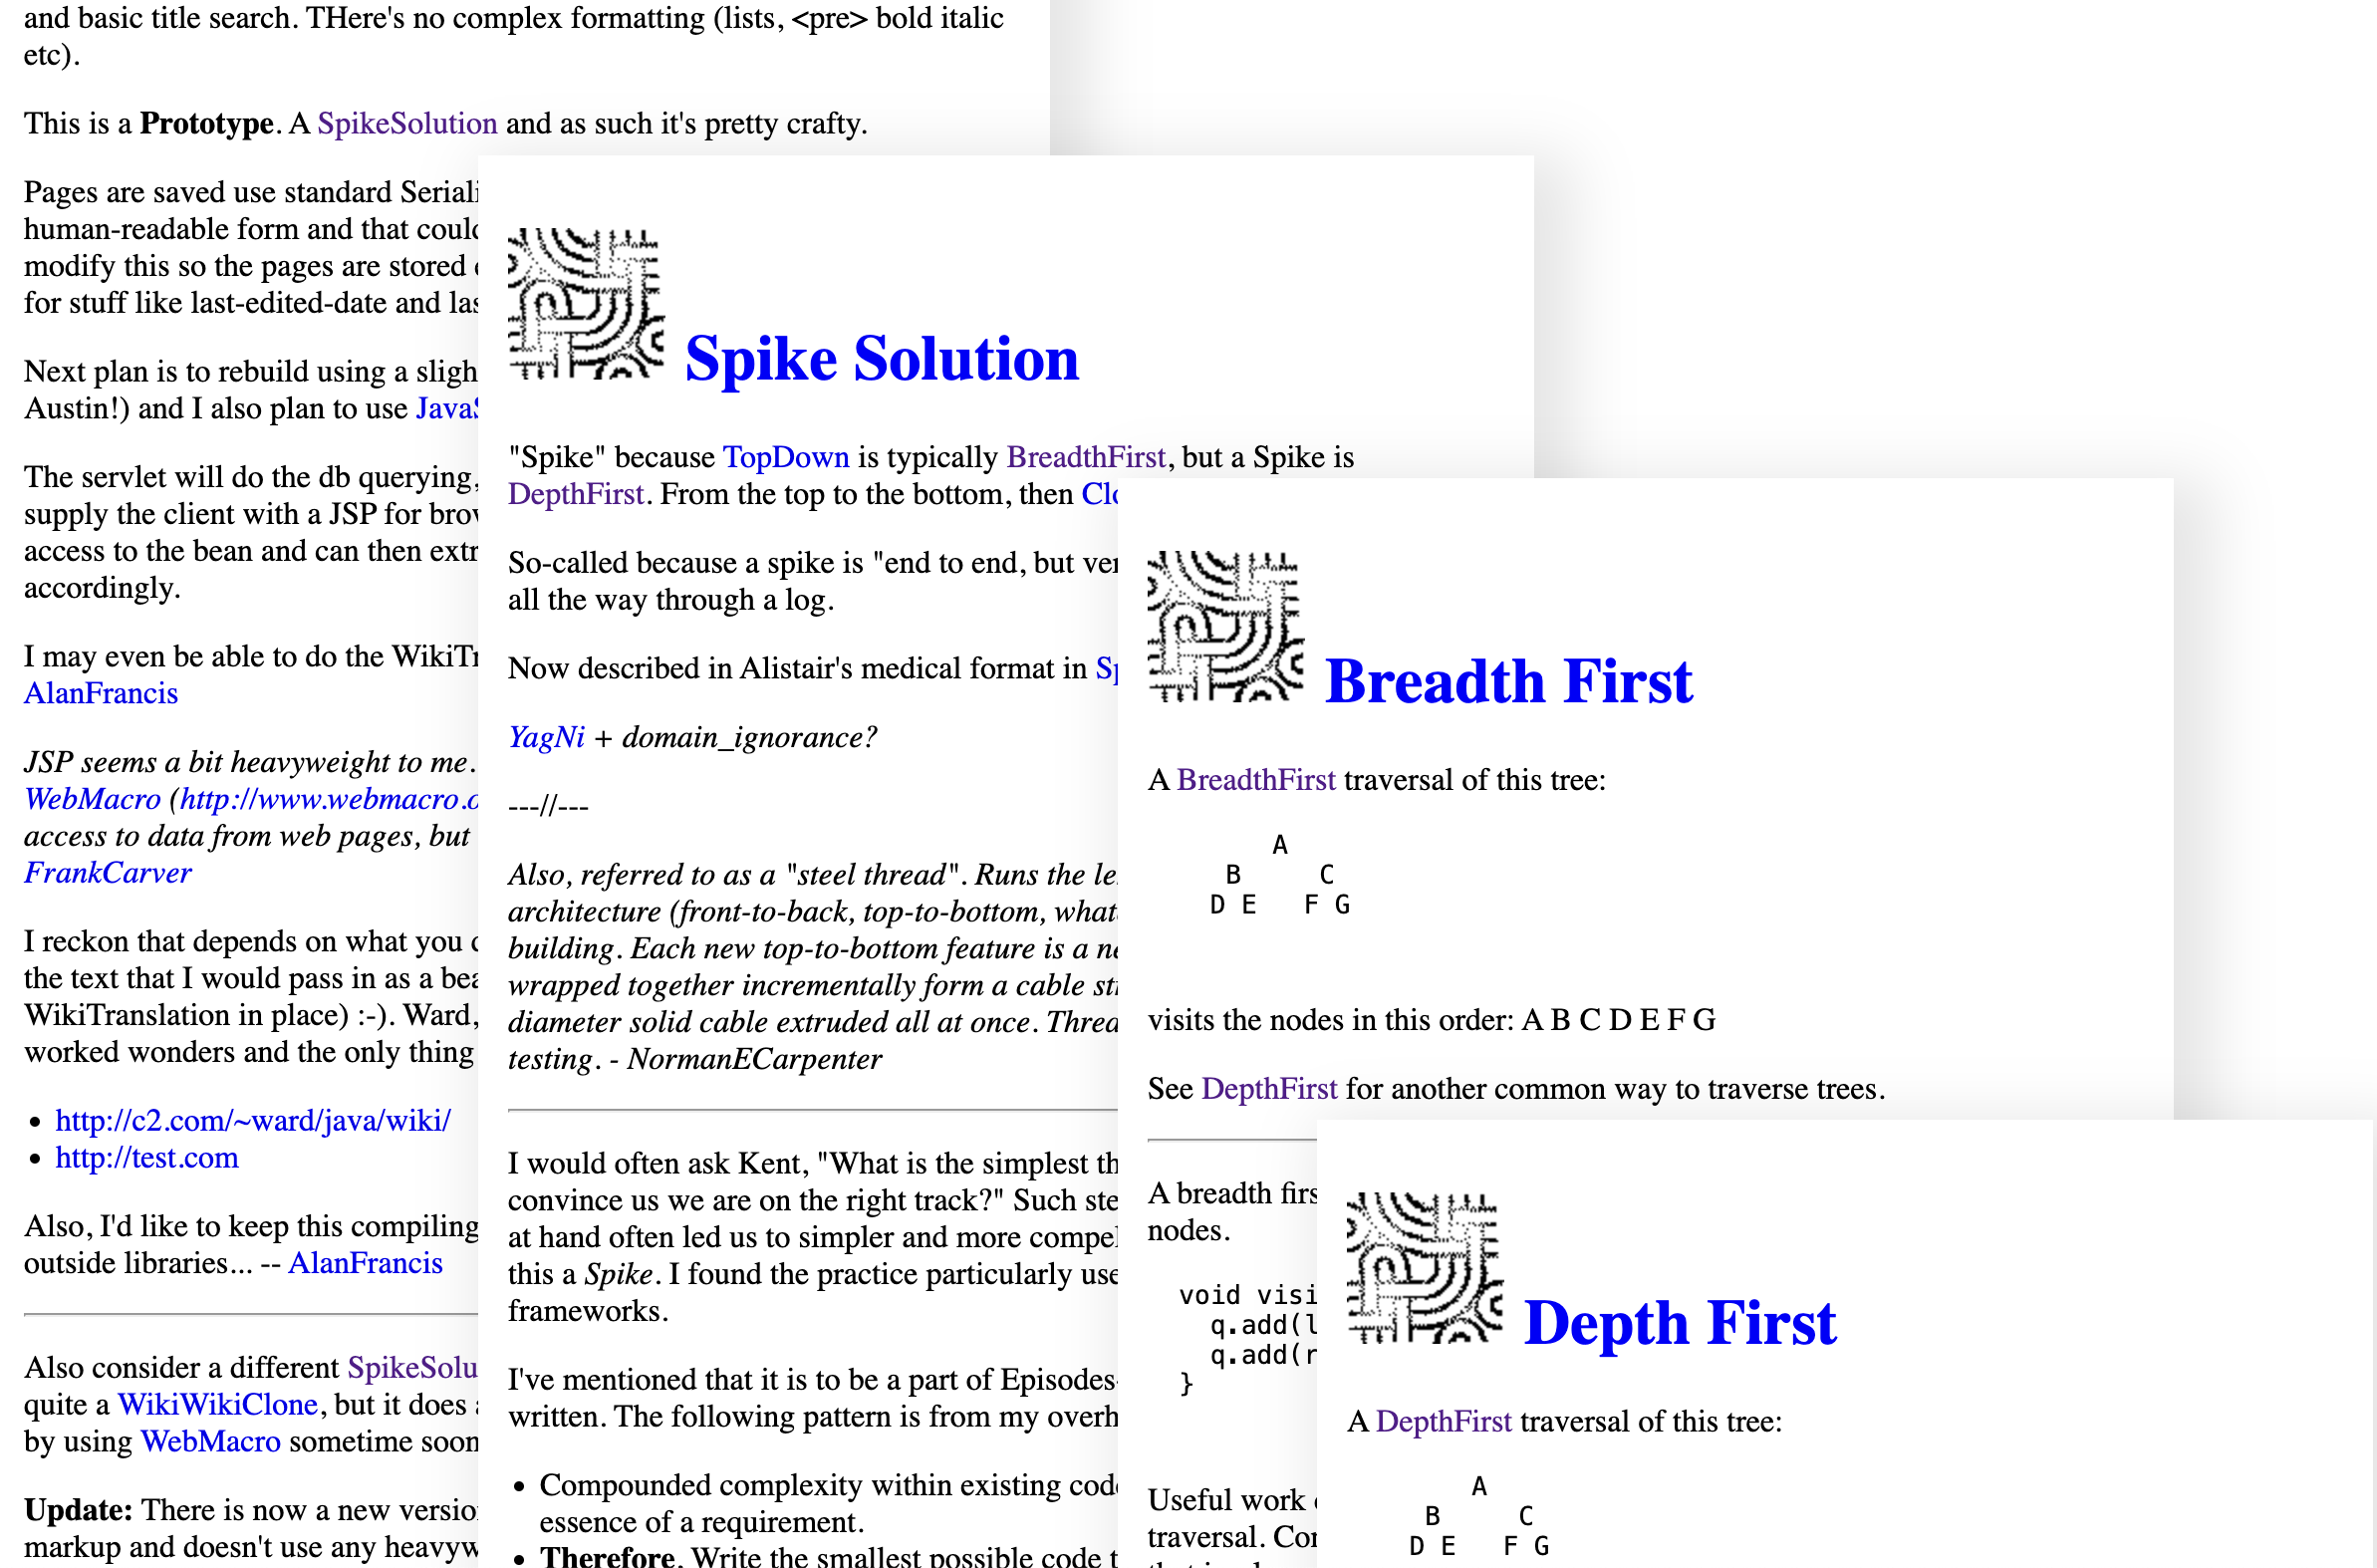 Screenshot of the C2 wiki, which has a main page about a prototype taking up the left column of the page, with a small page snippet titled Spike Solution overlays the Prototype page. Another page snippet titled Breadth First overlays Spike Solution, and a final page snippet titled Depth First overlays the Breadth First snippet.